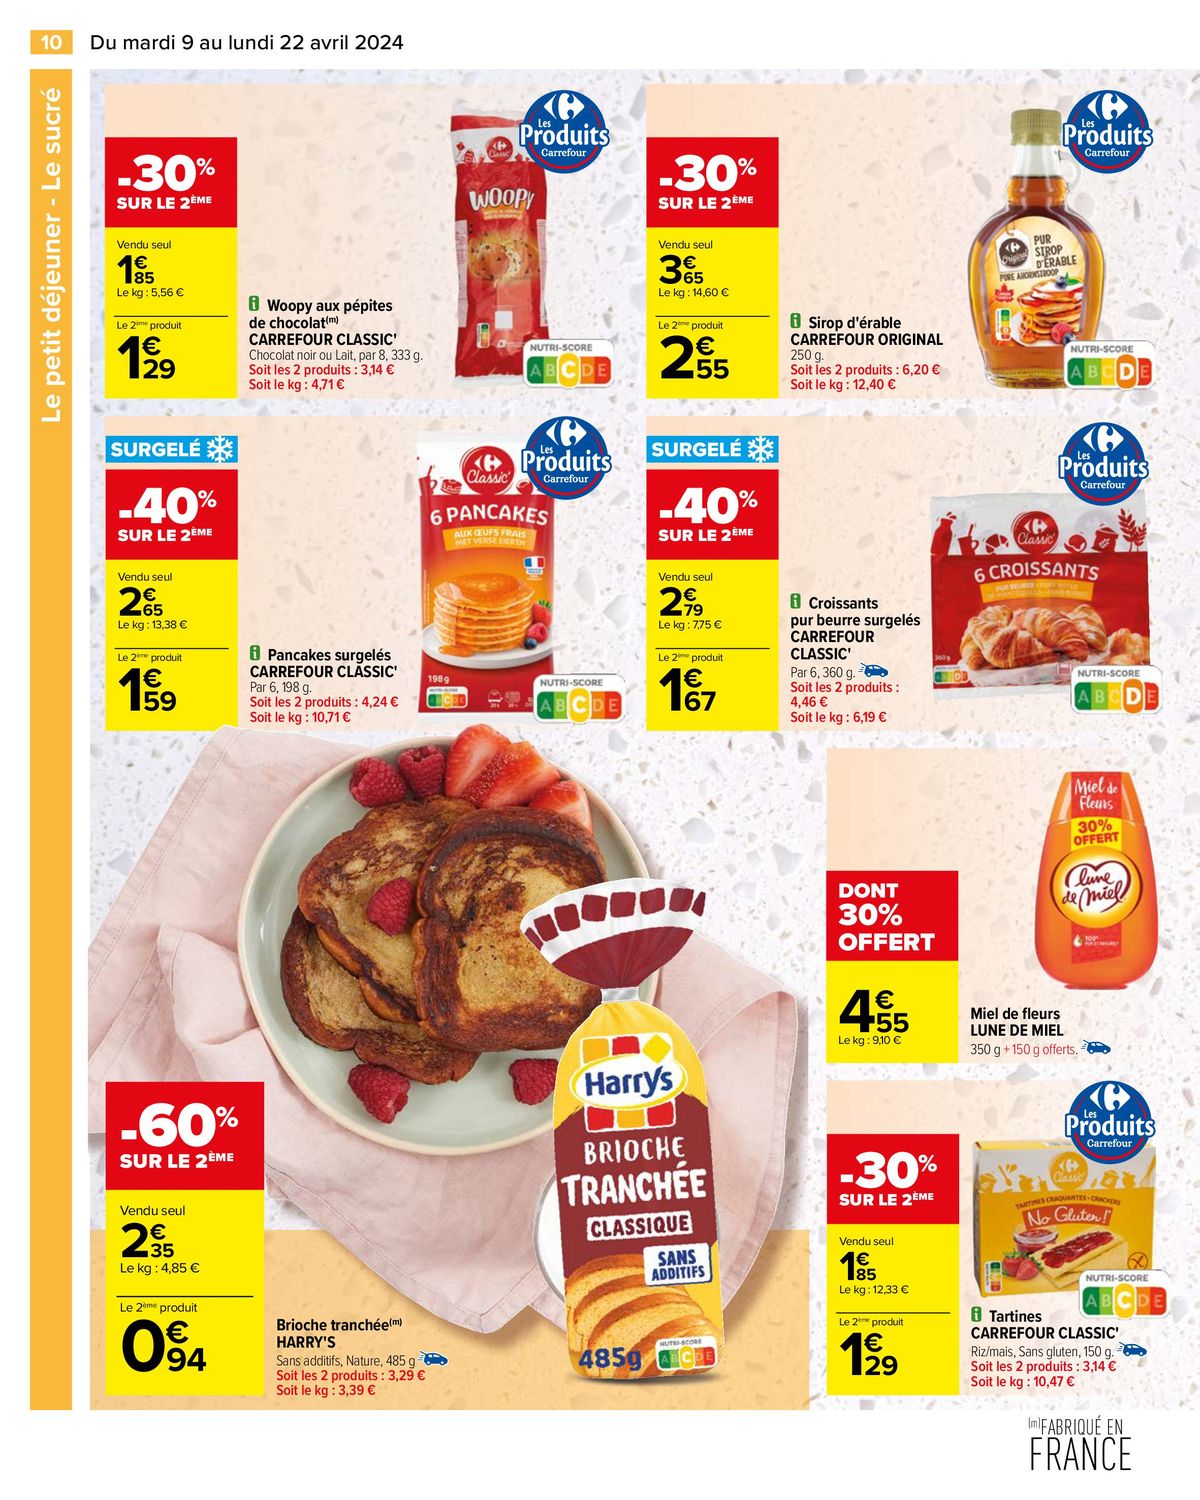 Catalogue OFFERT Carrefour Drive , page 00012